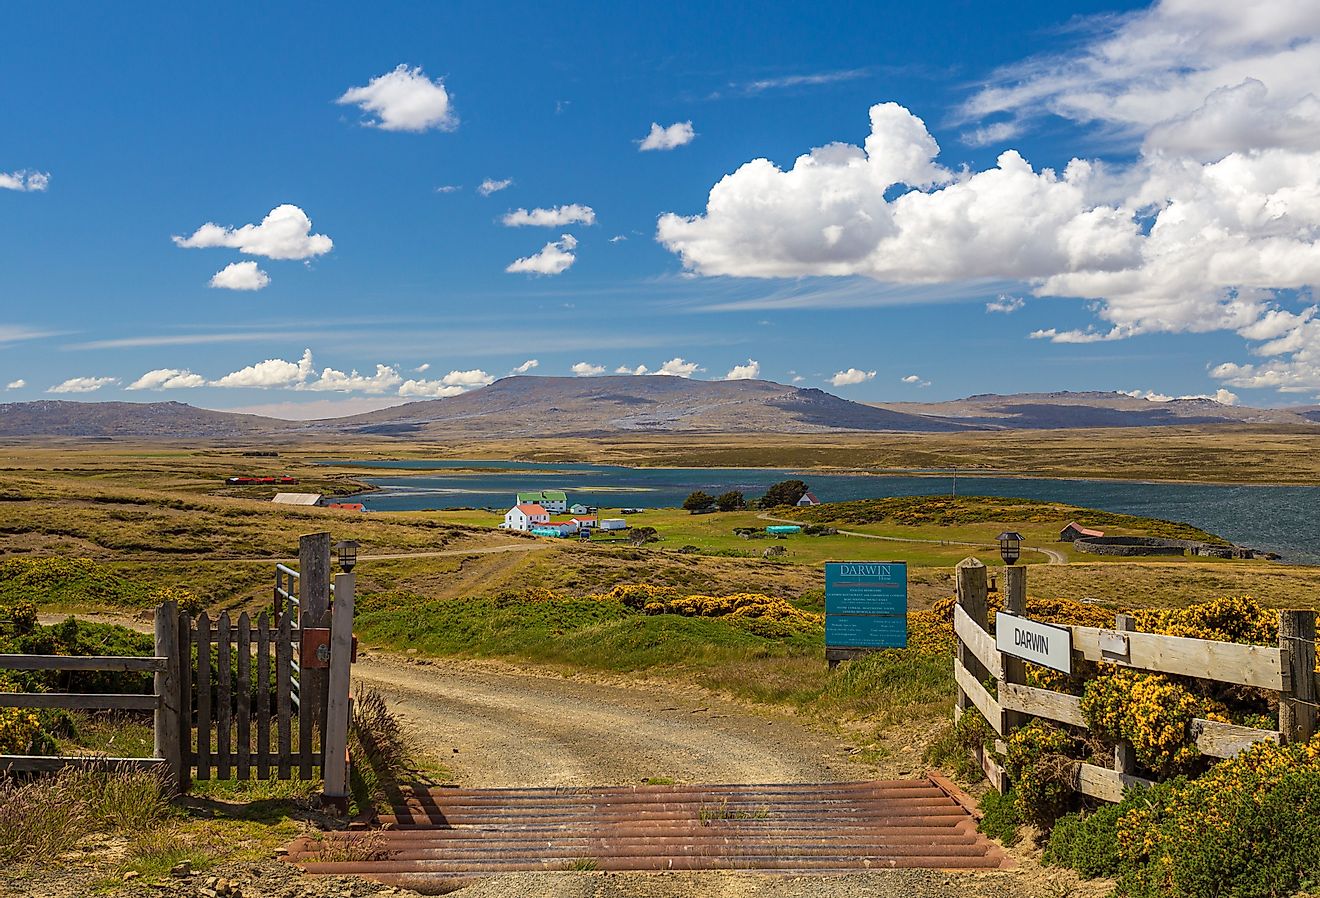 Entrance to town of Darwin, Falkland Islands.